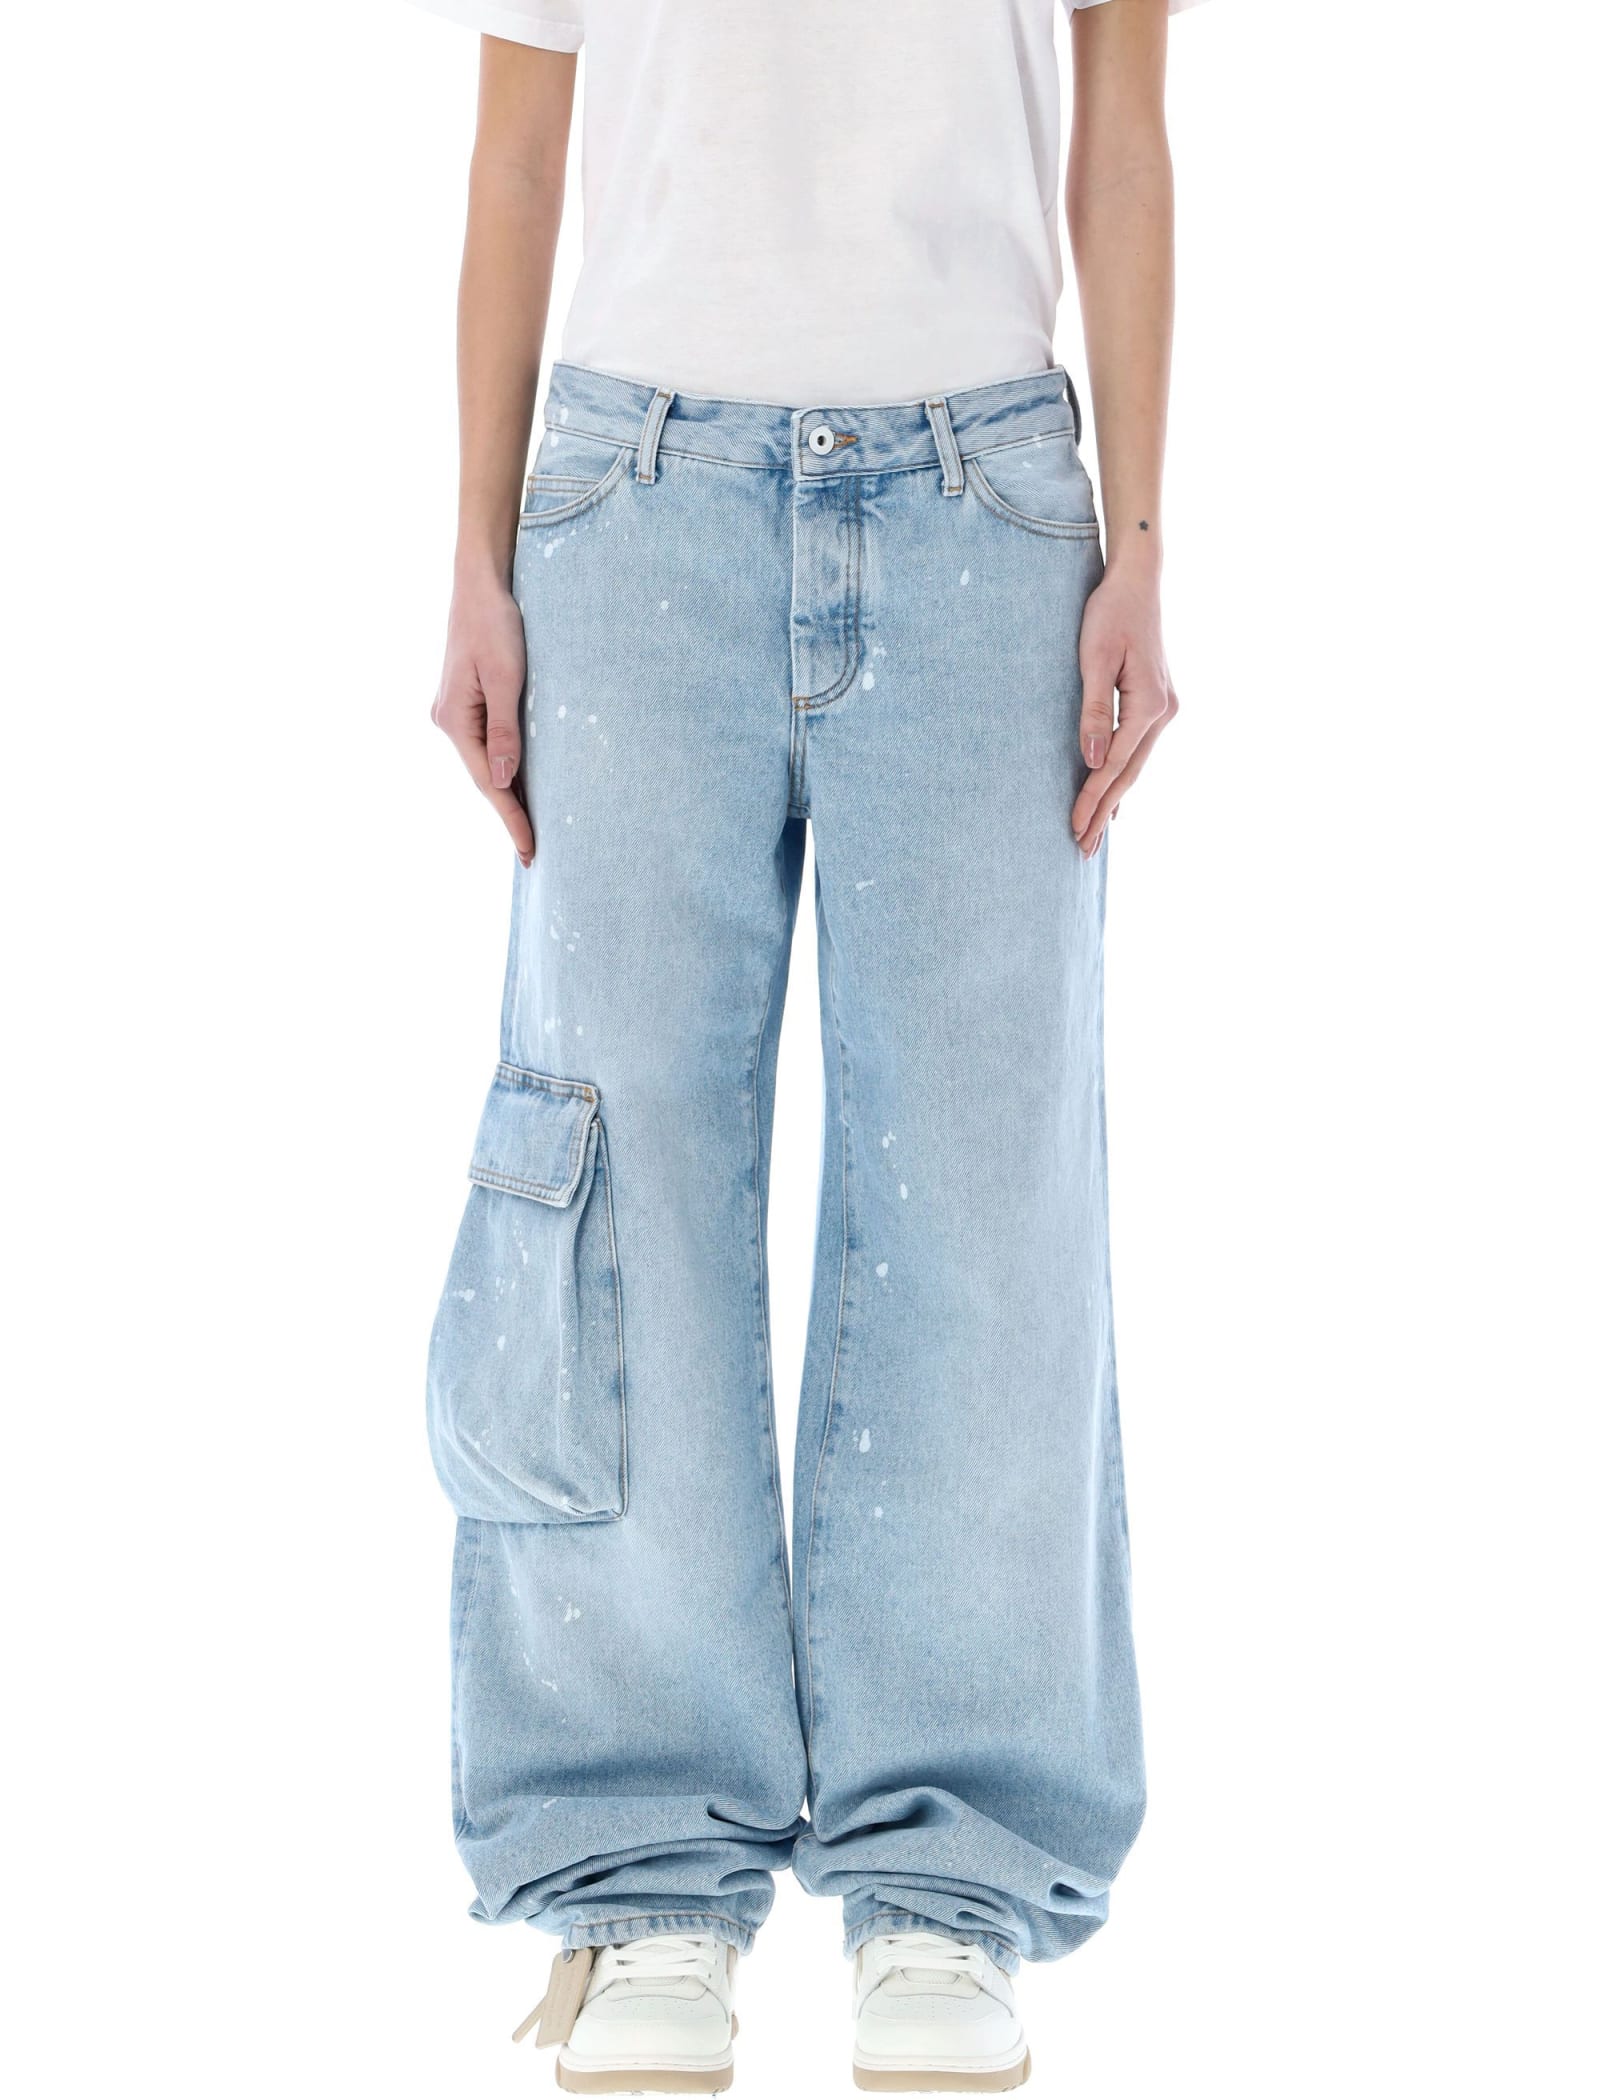 OFF-WHITE TOYBOX PAINTED POCKET PANT